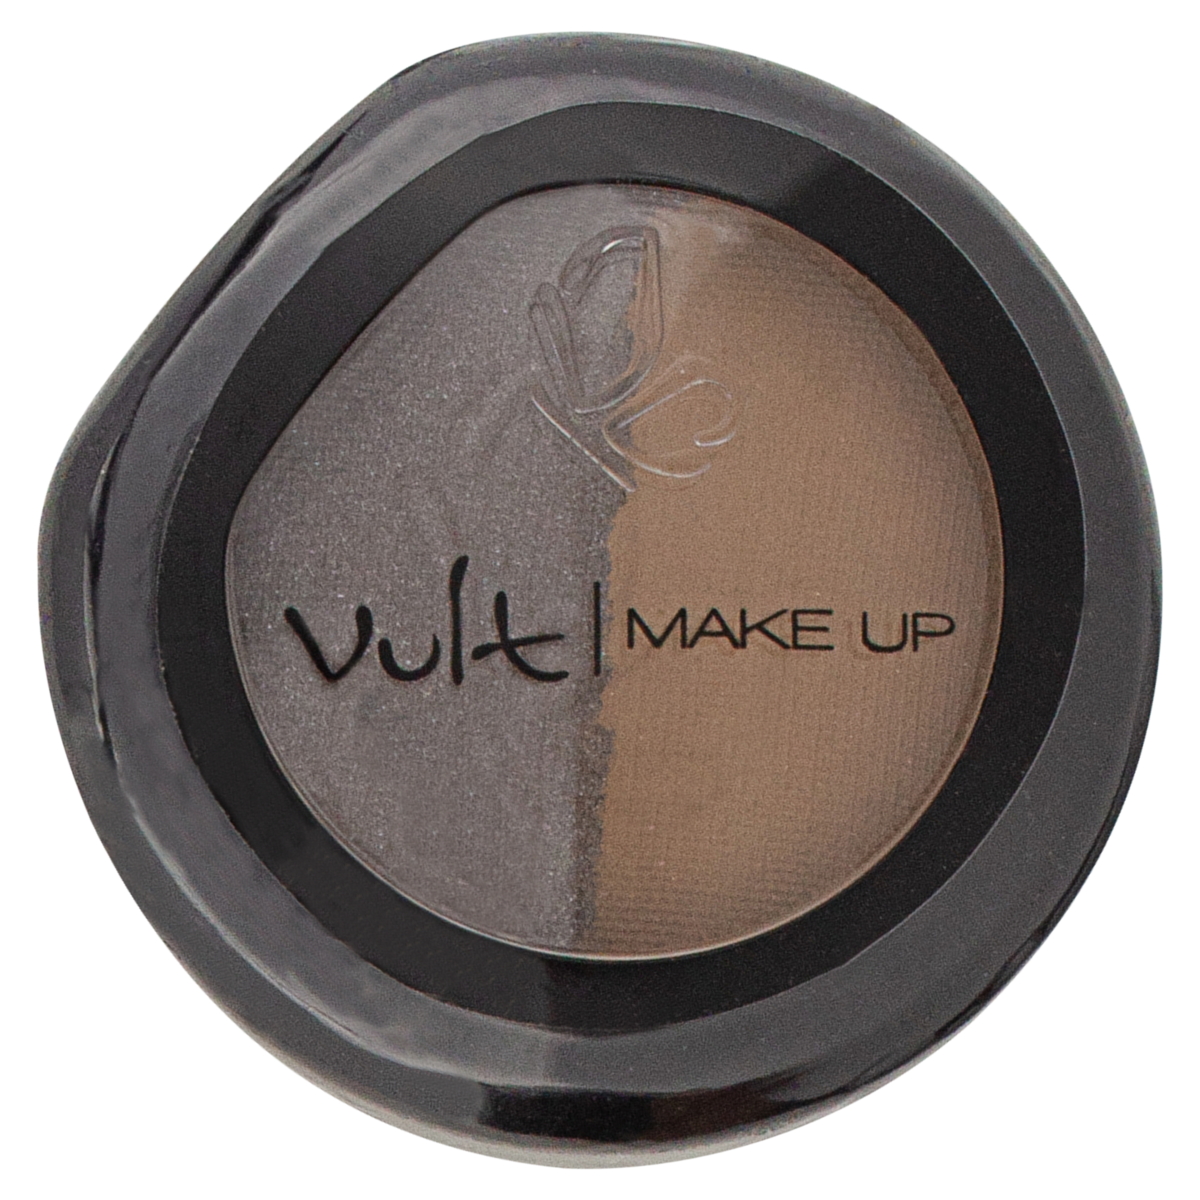 7898417962140 - SOMBRA DUO 14 VULT MAKE UP 2,5G